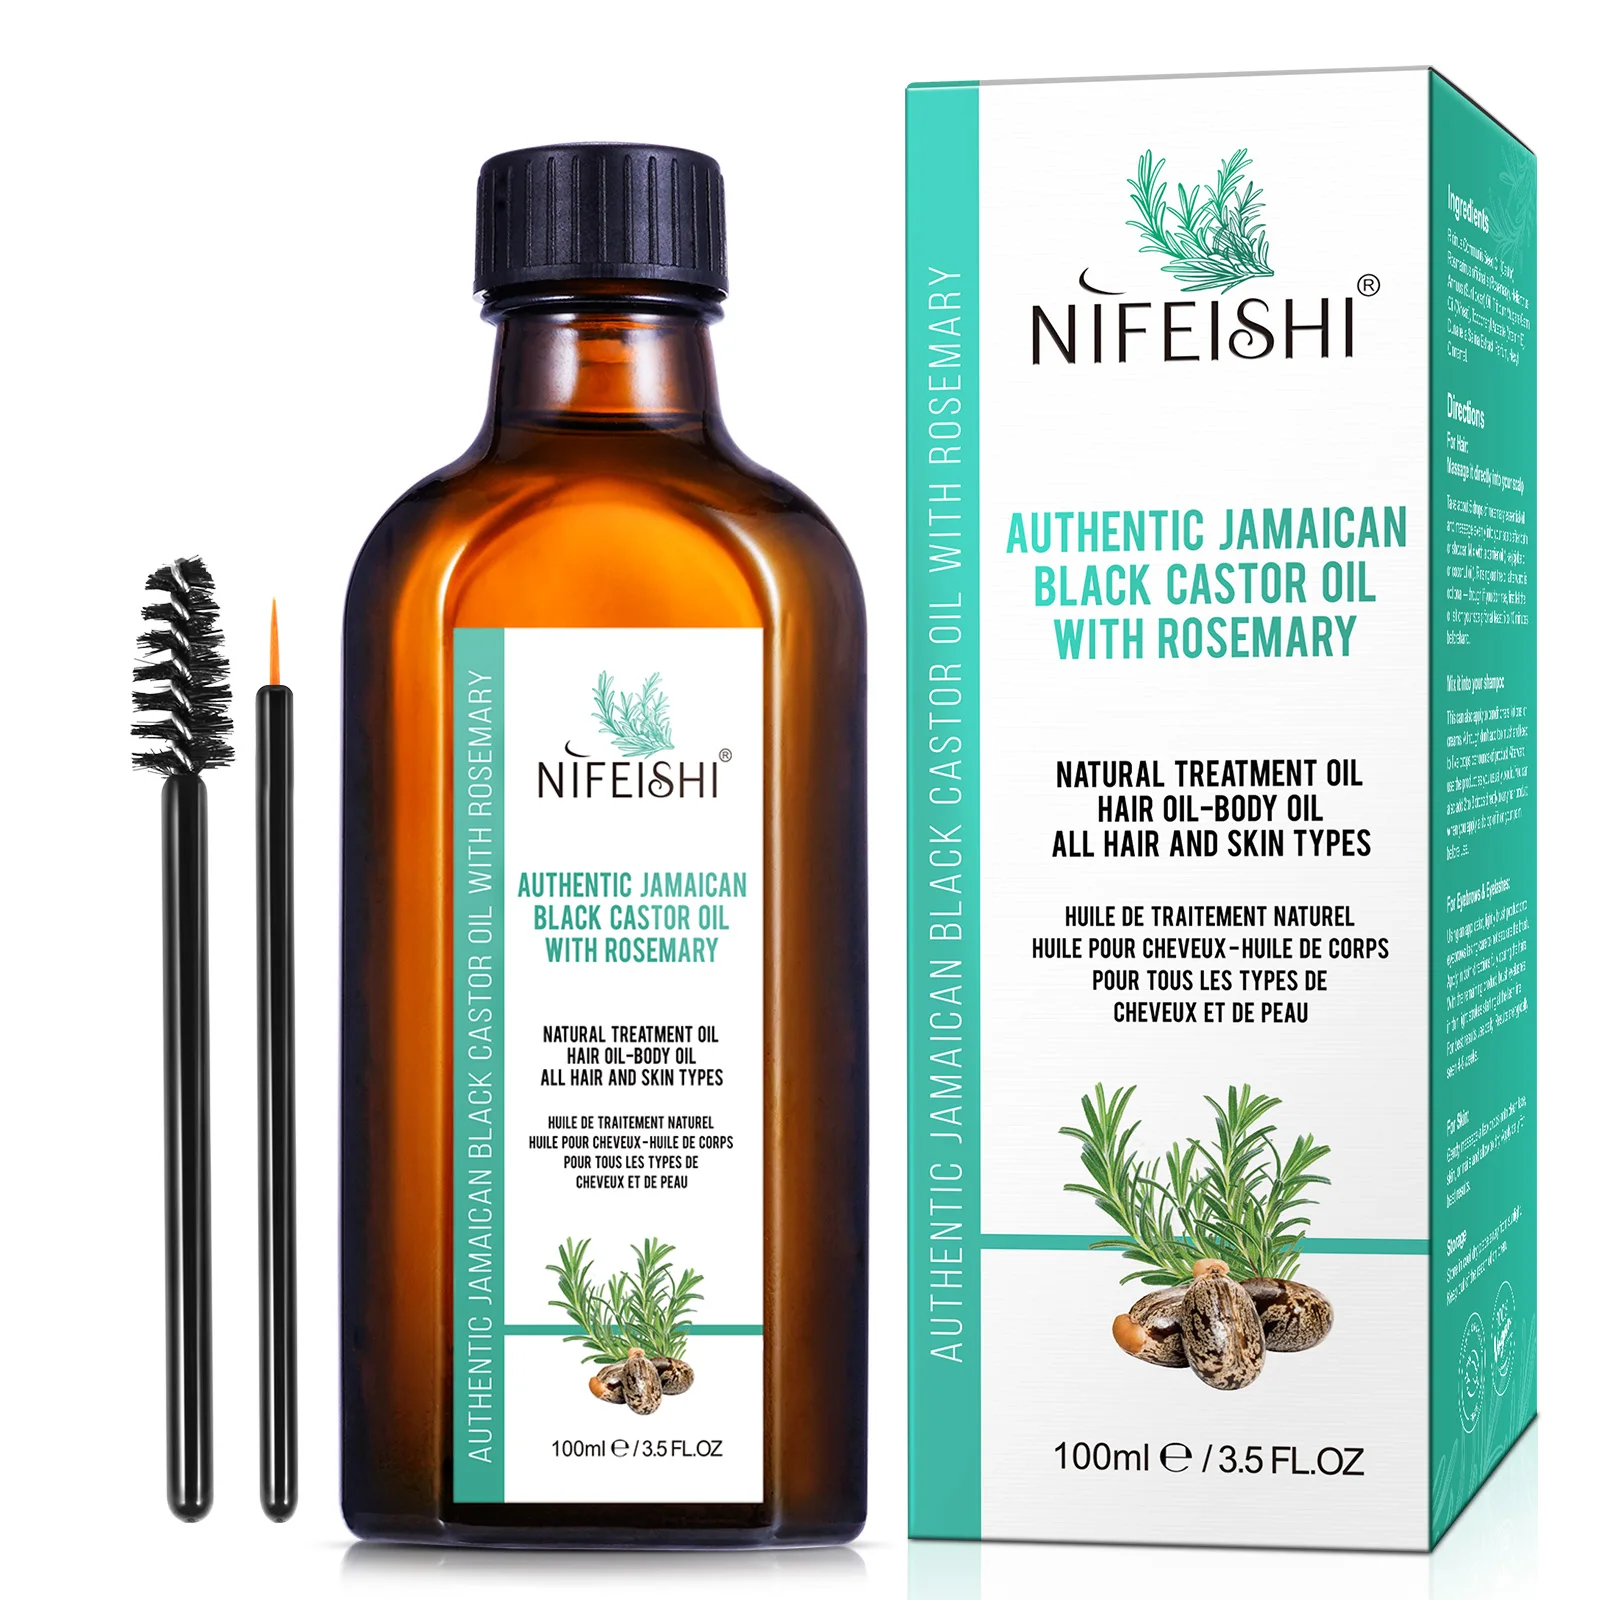 

NIFEISHI private label organic moisturizer body skin care hair growth rosemary essential oil jamaican black castor oil